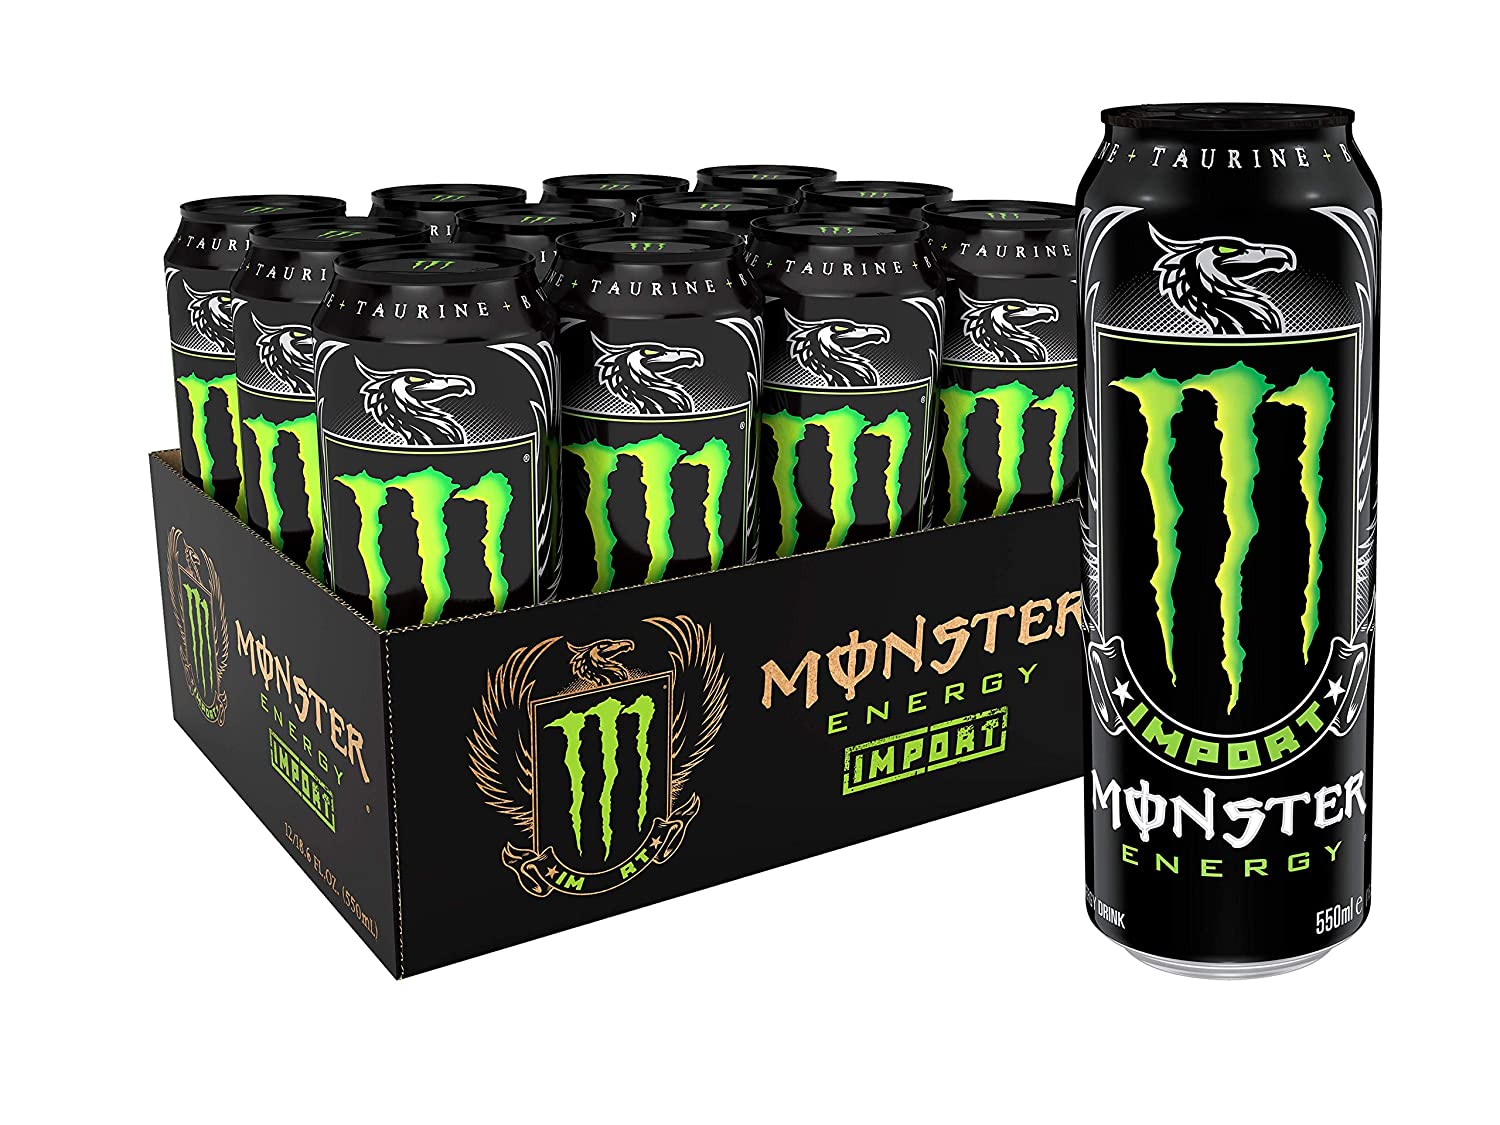 Select Amazon Accounts: 24-Pack of 16oz. Monster Energy Drinks (various) from $25.75 & More + Free S/H